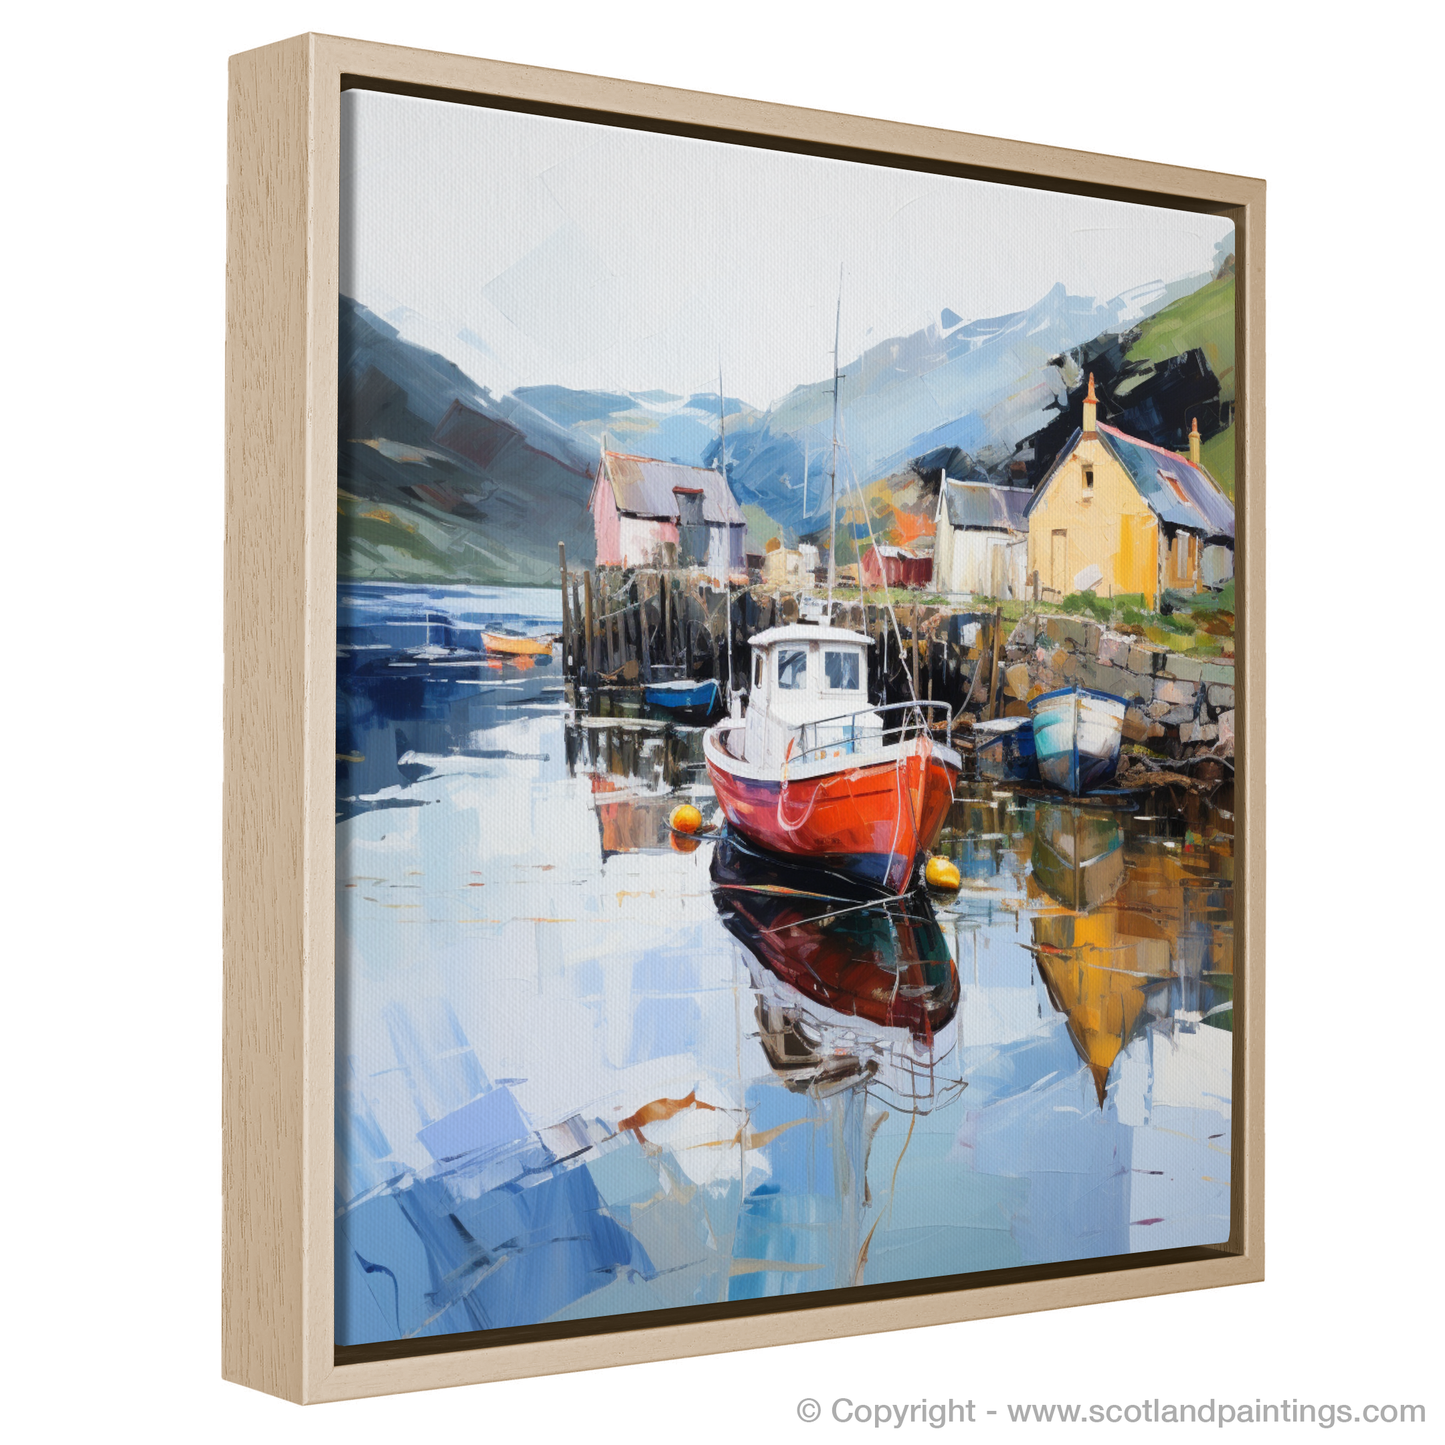 Painting and Art Print of Tayvallich Harbour, Argyll entitled "Expressionist Elegance of Tayvallich Harbour".